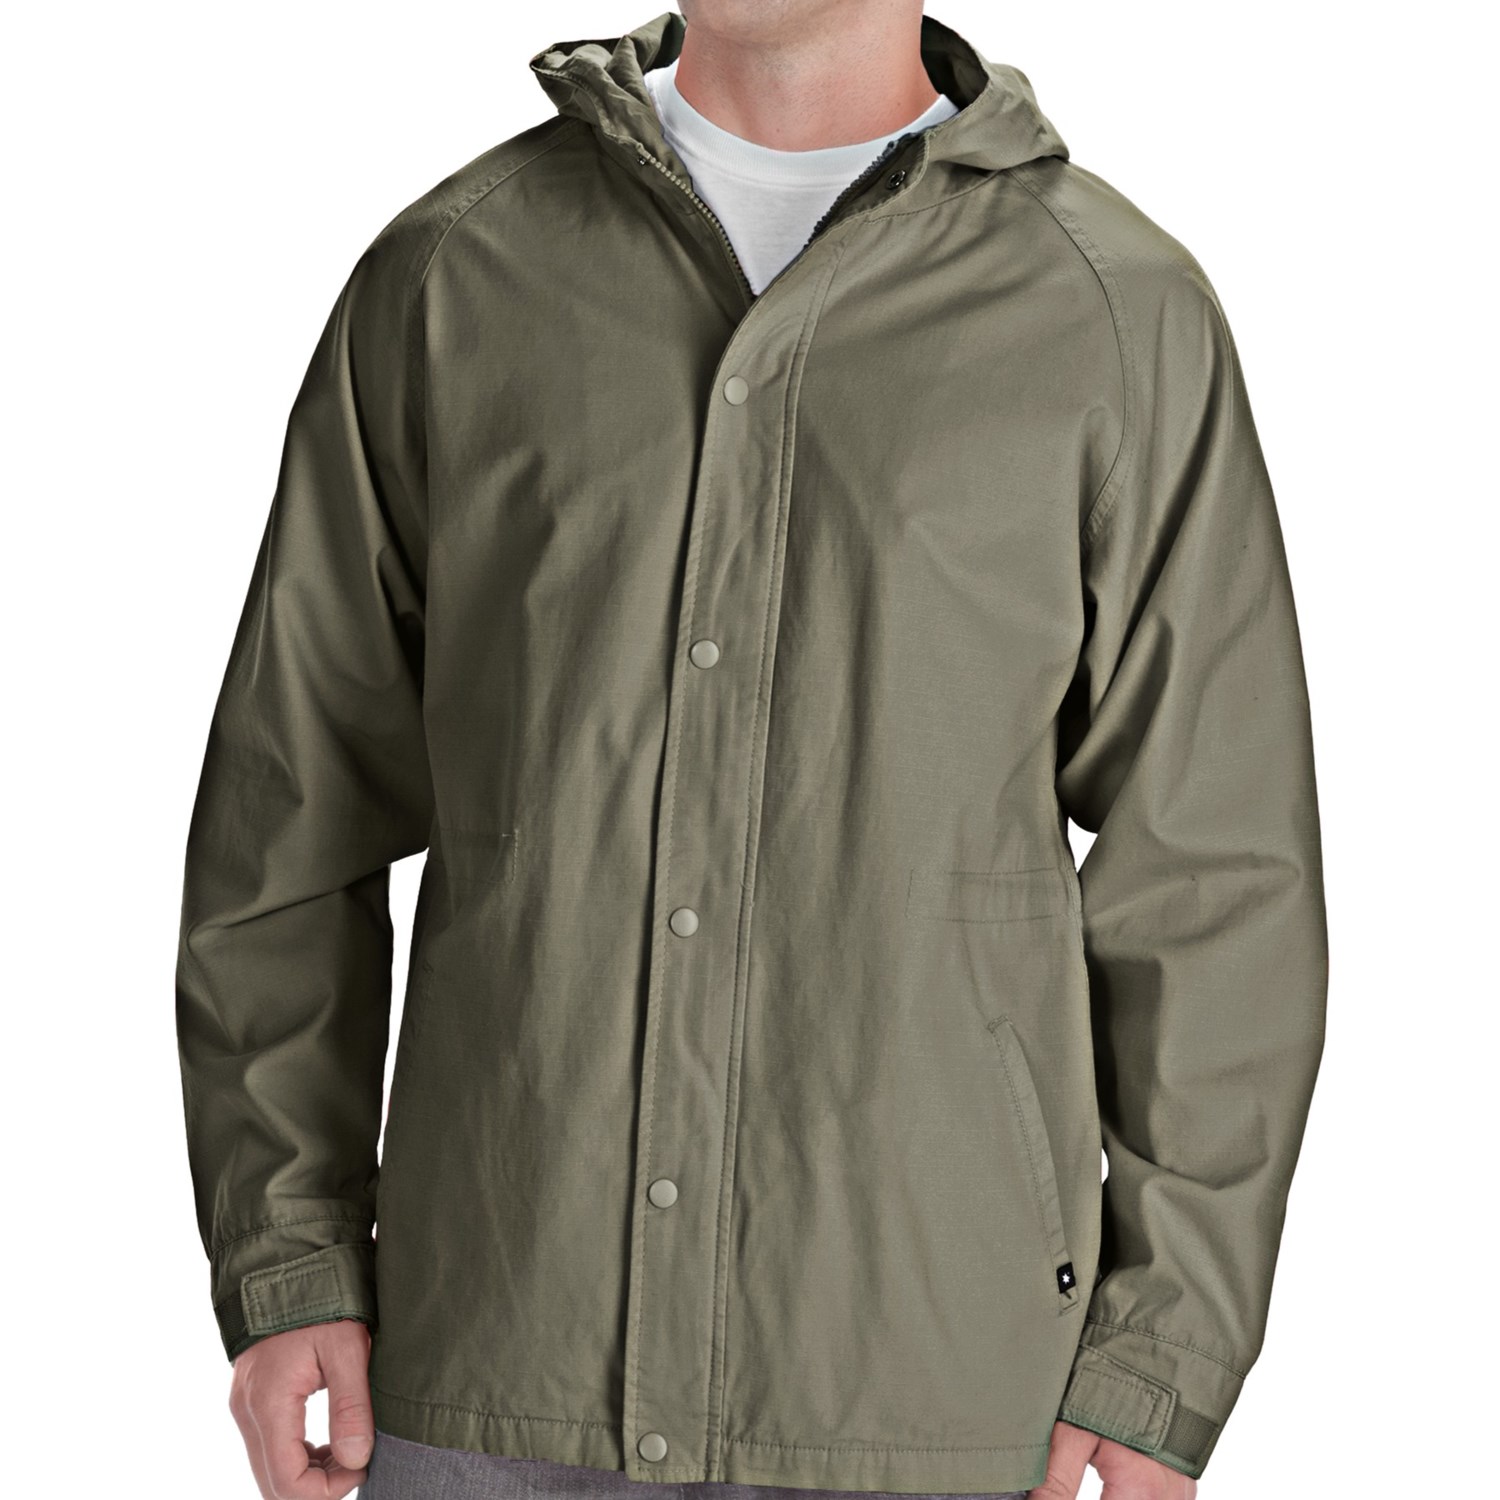 DC Shoes Marshall Hooded Jacket (For Men) 5131M - Save 87%